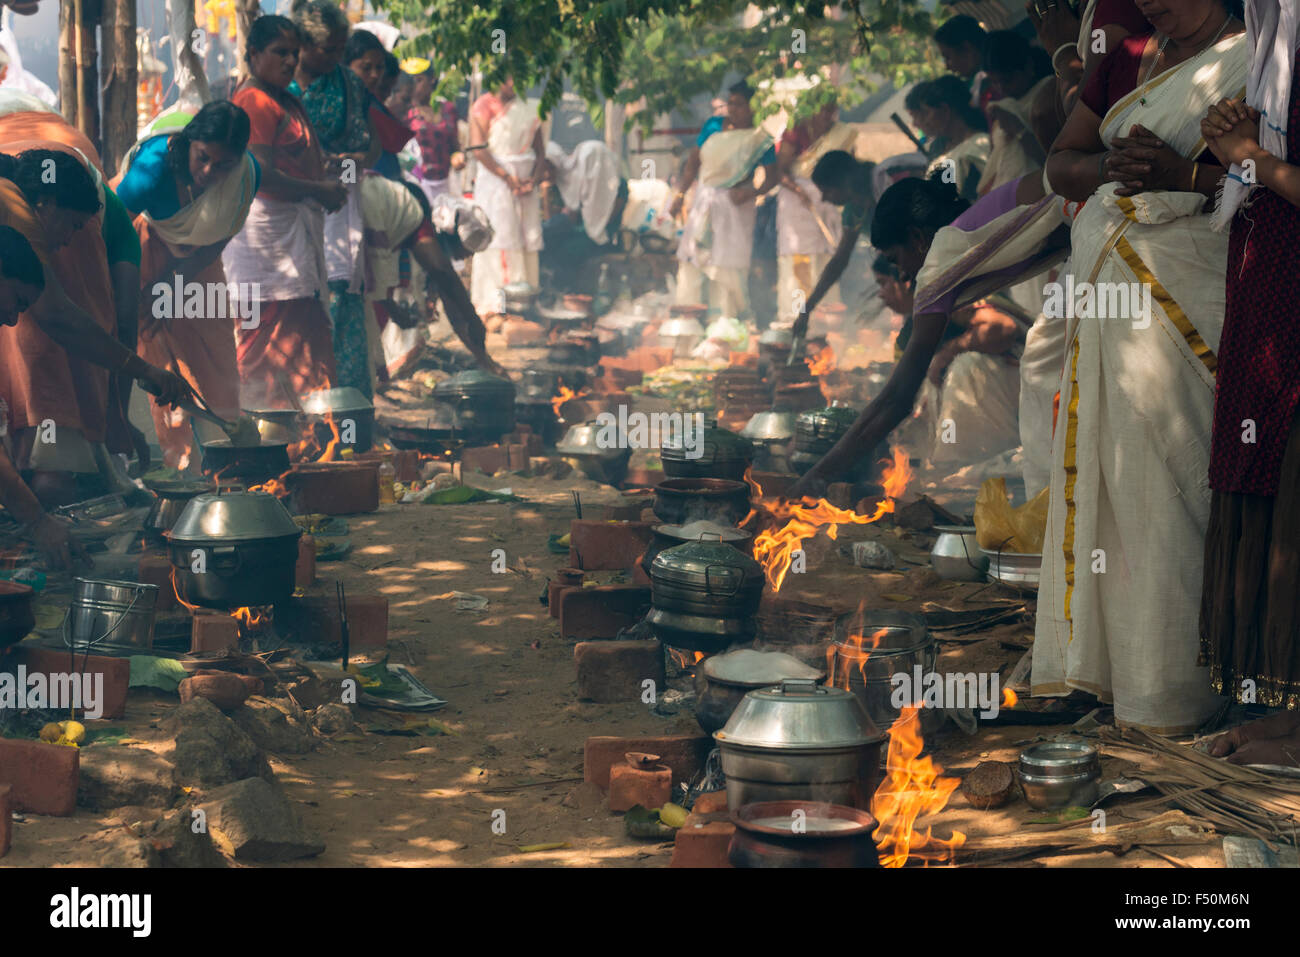 Many women, 3,5 millions in total, are cooking prasad on open fire in the busy streets during the Pongala festival Stock Photo